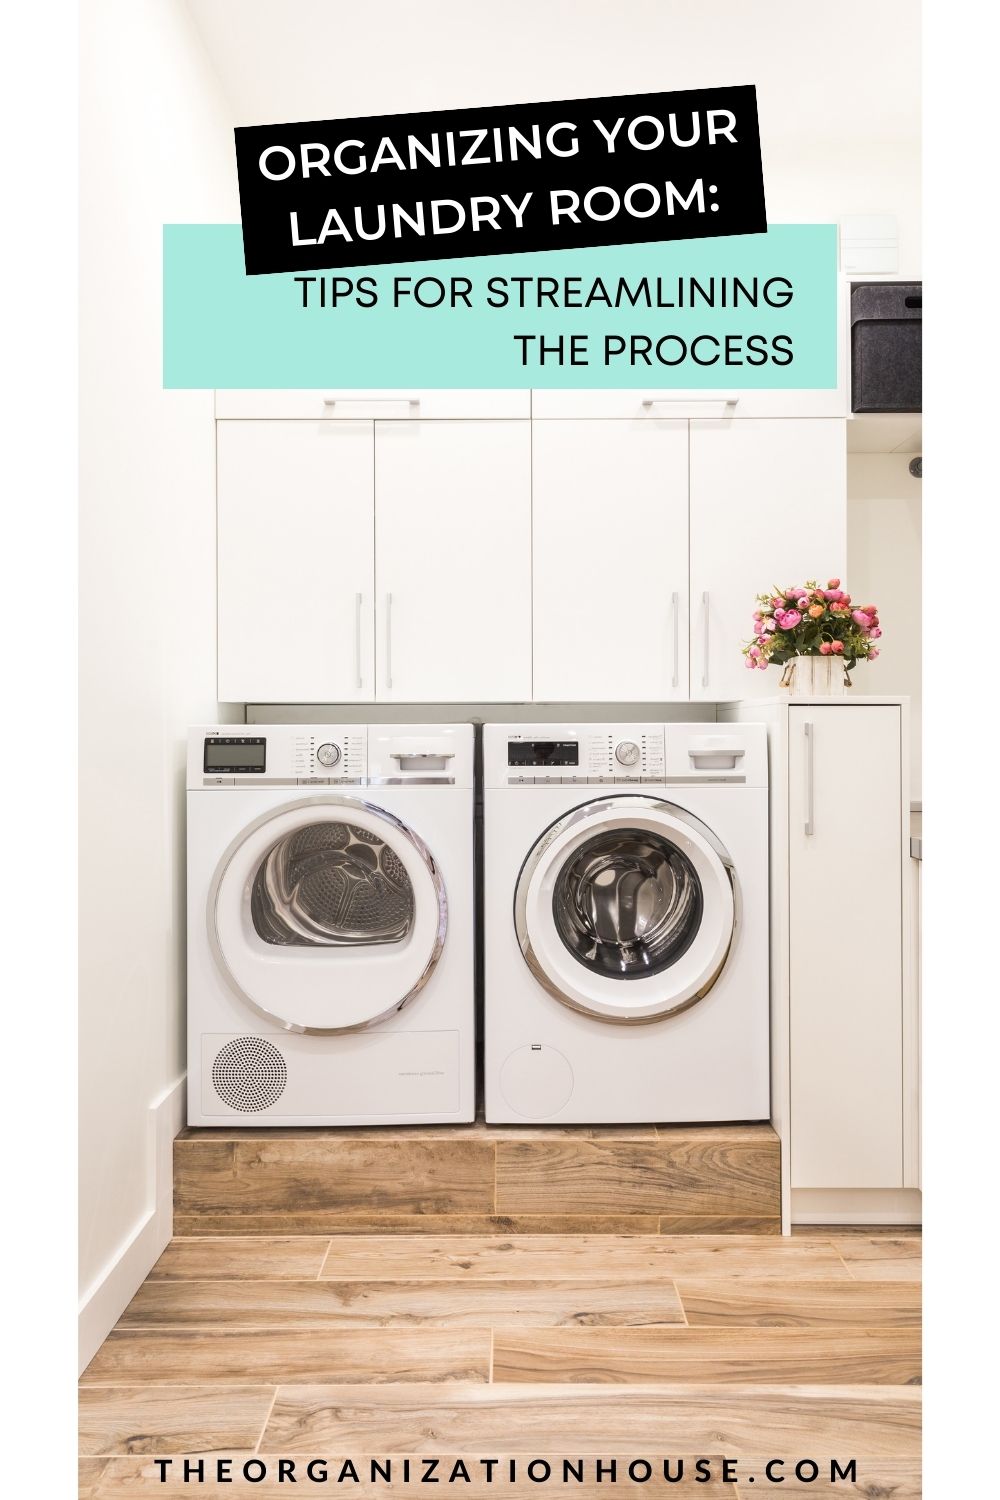 Organizing Your Laundry Room Tips for Streamlining the Process